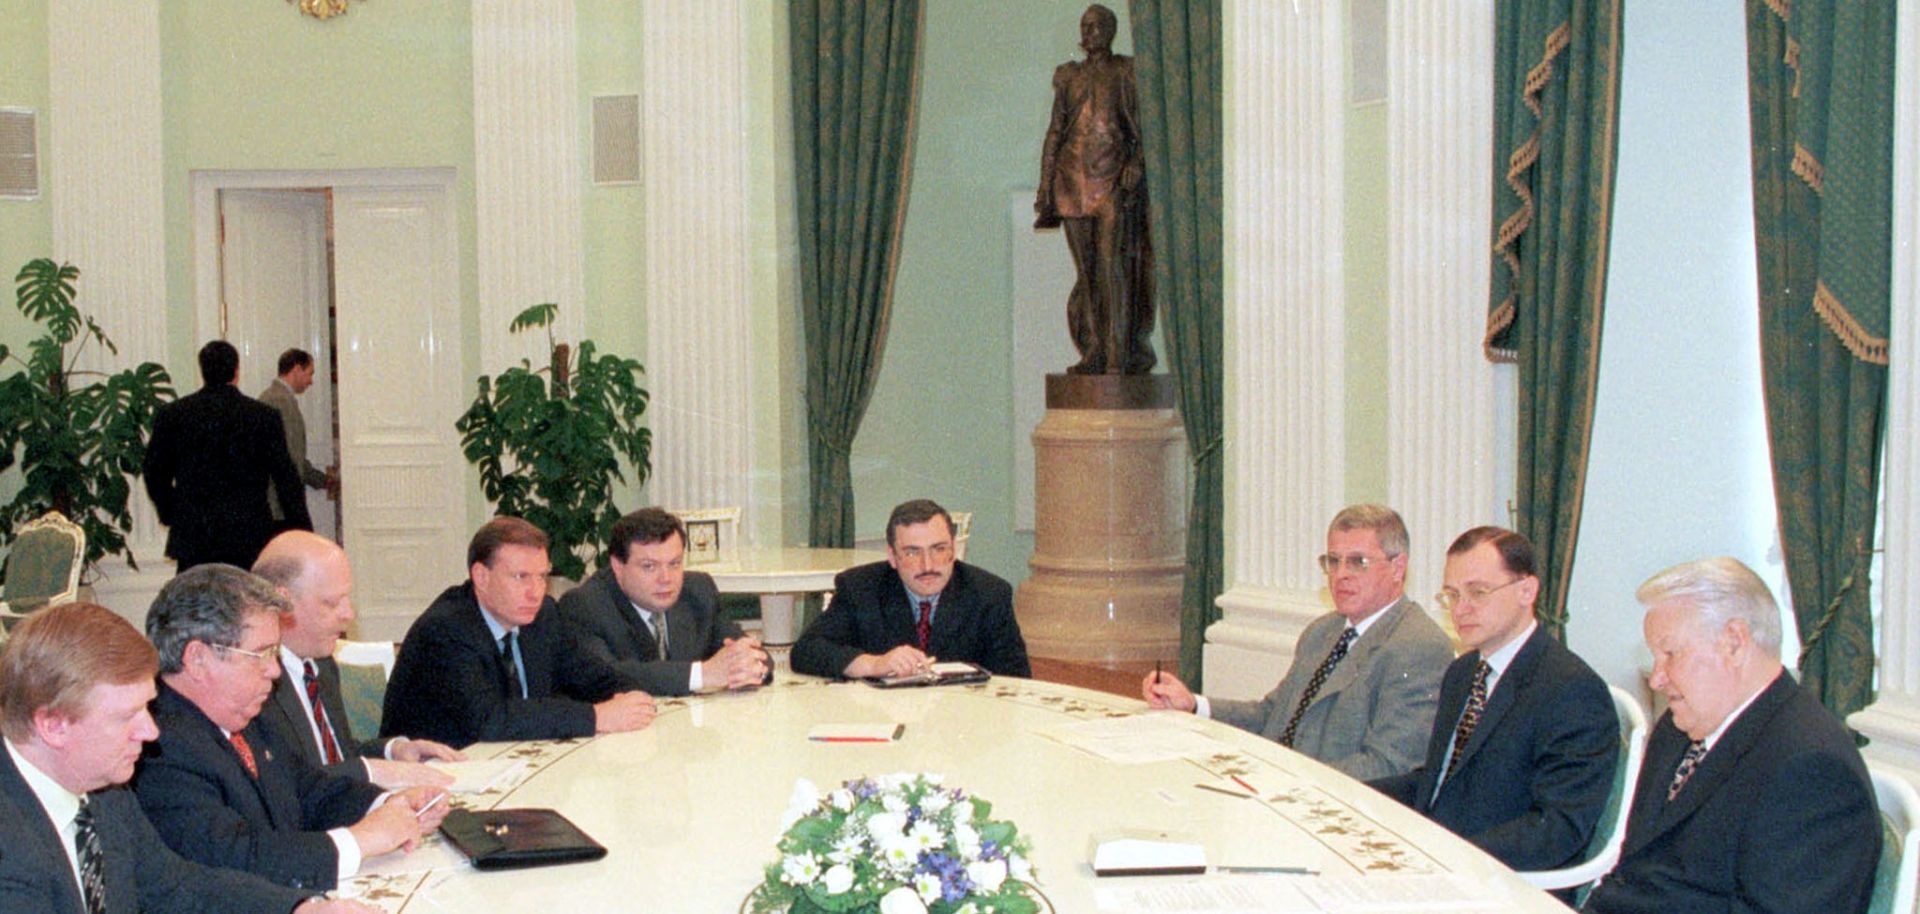 Russian president boris yeltsin sits in a meeting with leading national bankers.